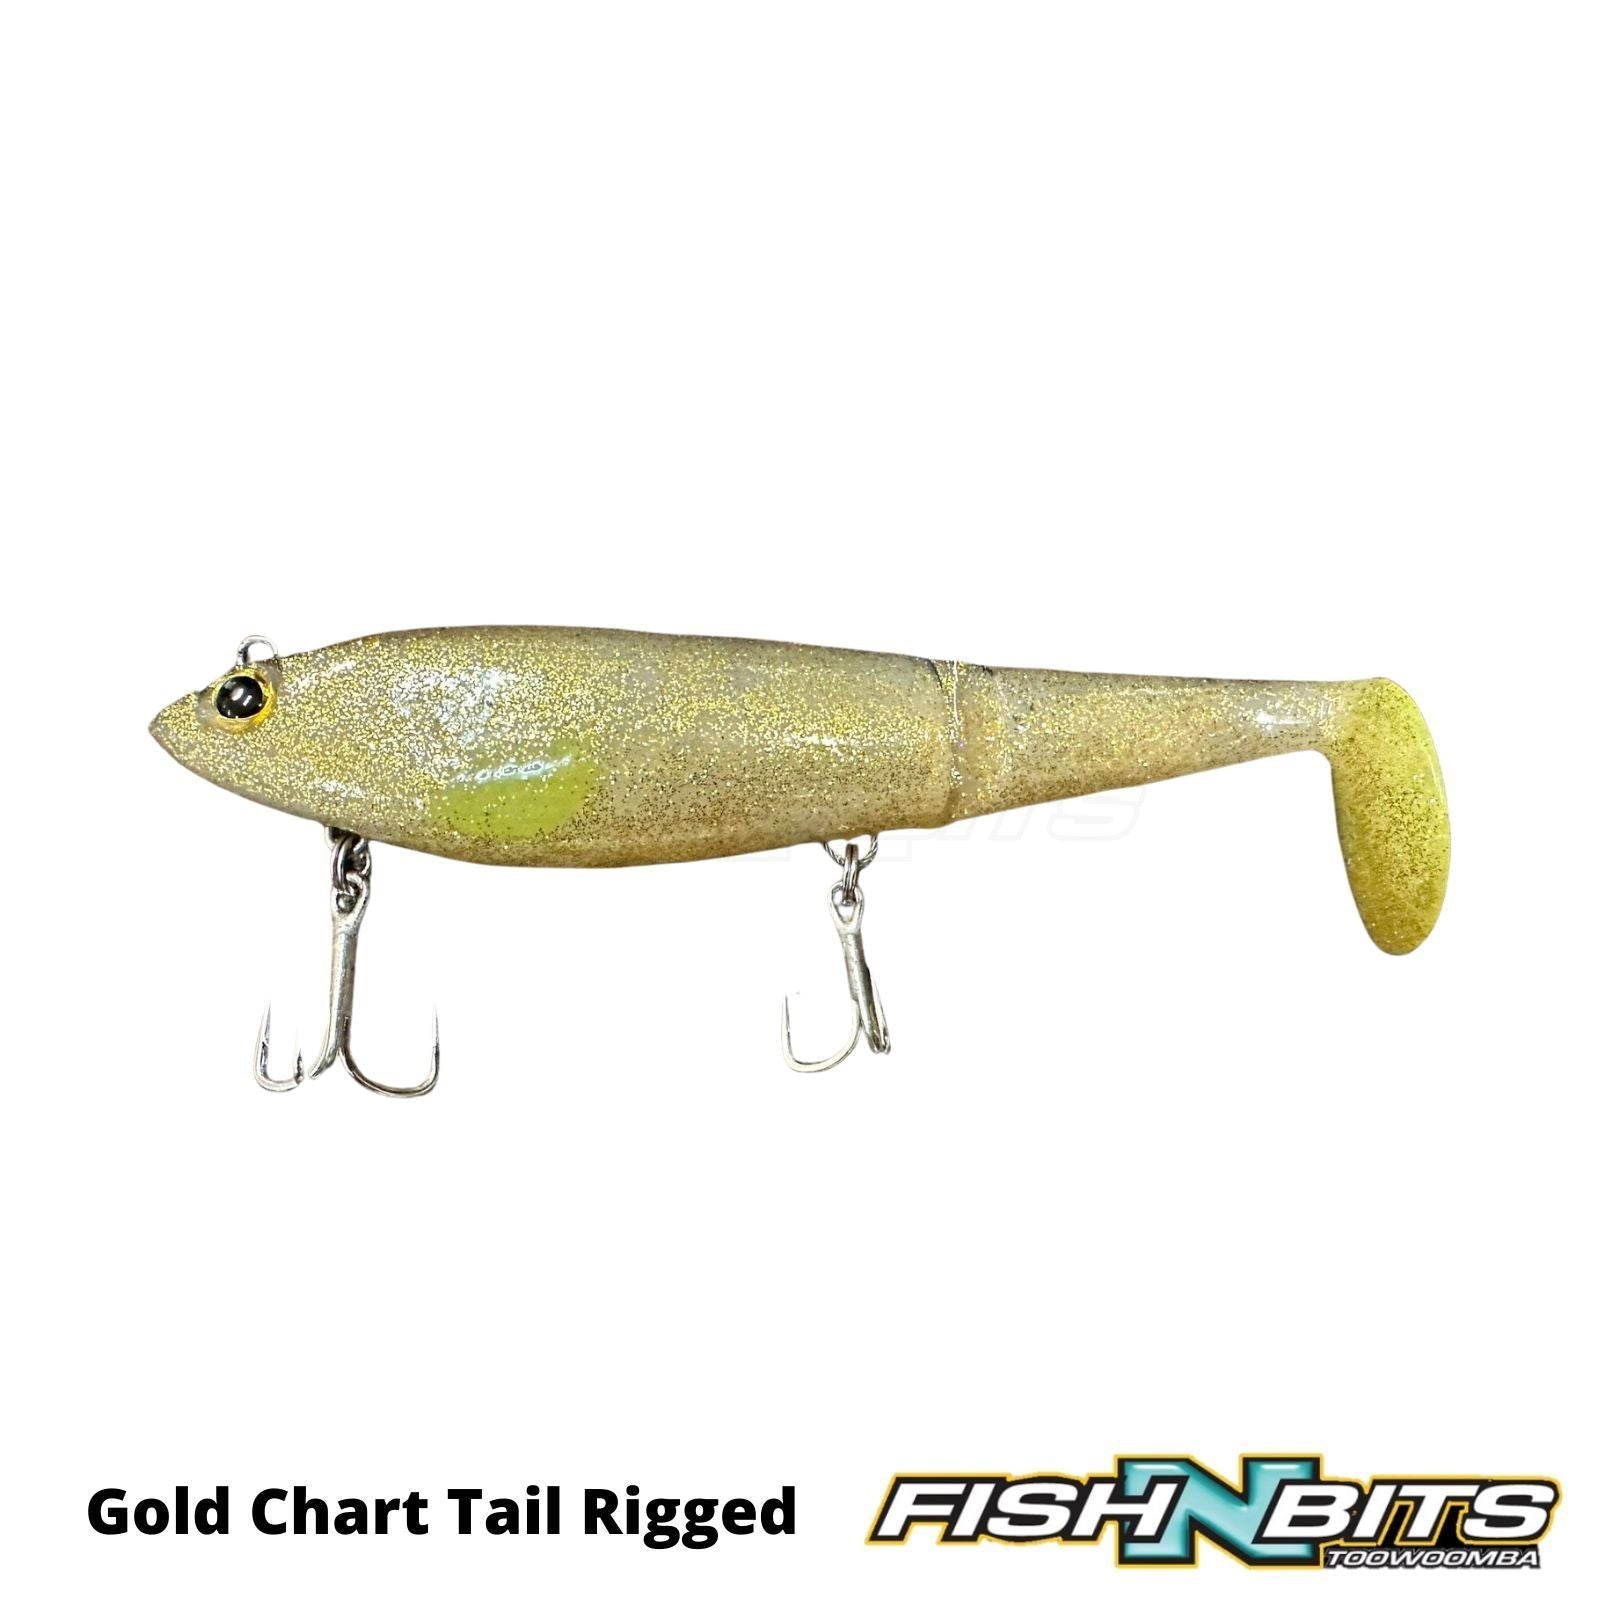  INNAPPRO Pre-Rigged Jig Head Soft Fishing Lures